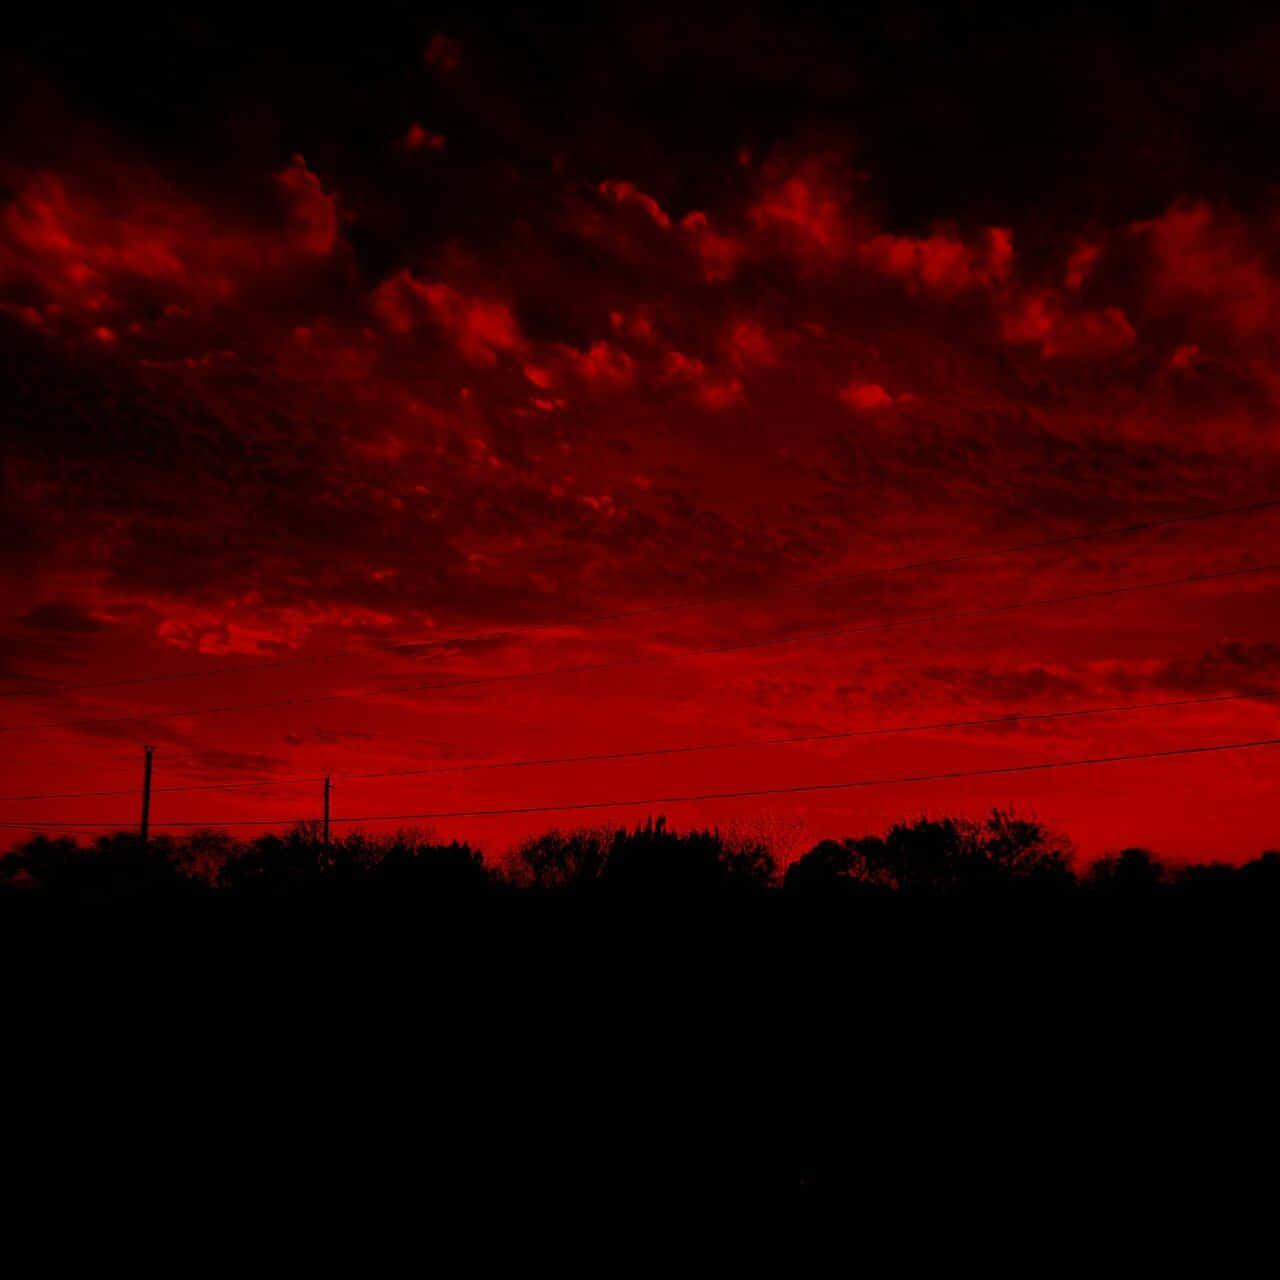 A red sky with clouds and power lines - Dark red